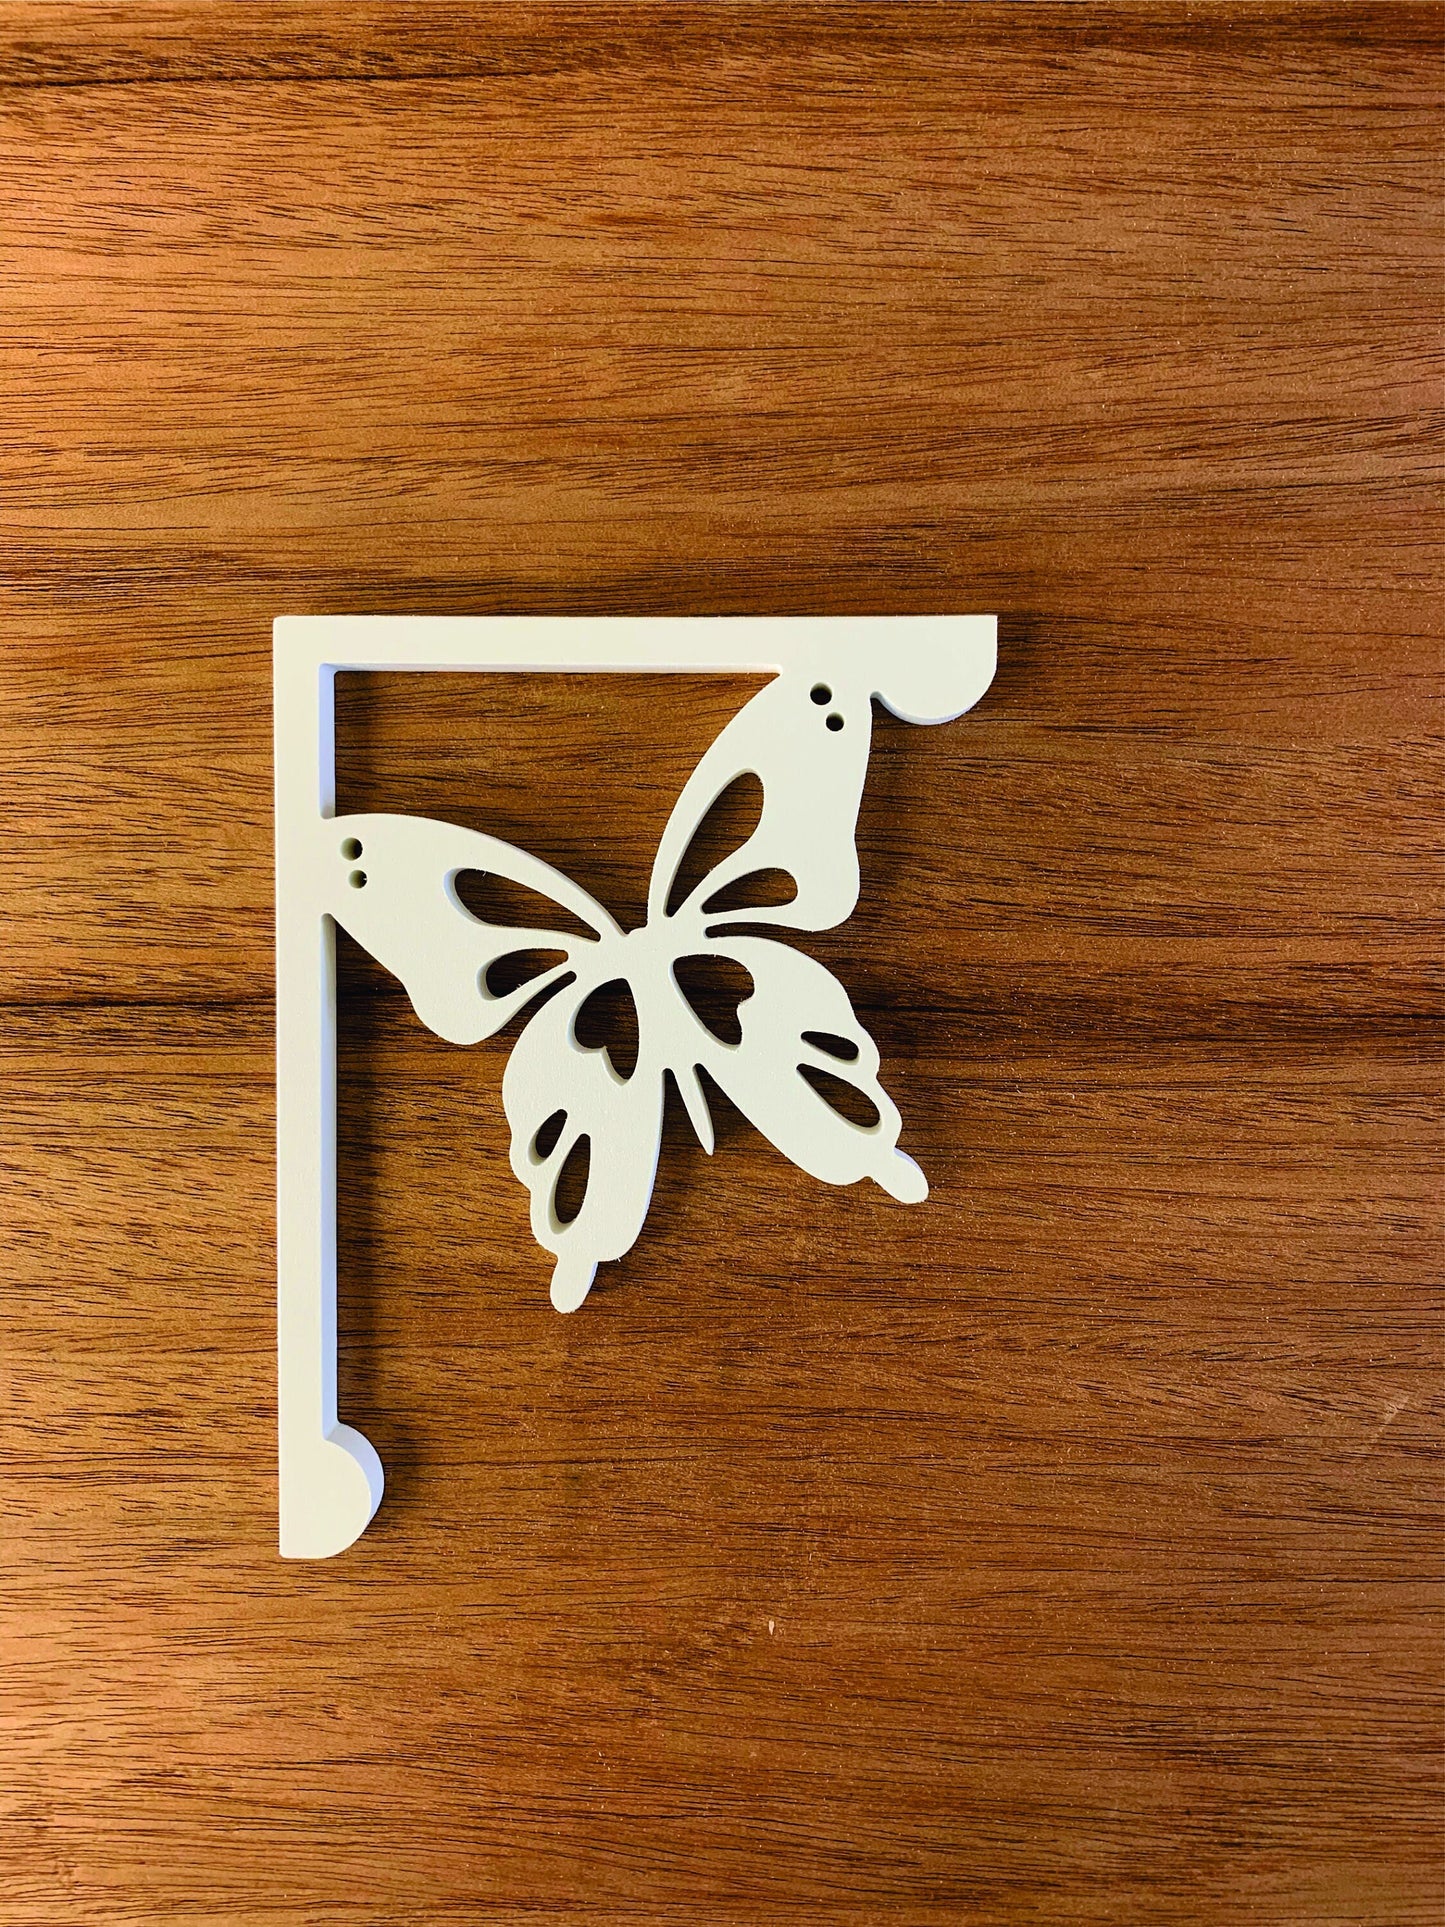 Mailbox Bracket - Butterfly Small 7x9 inch, Custom Mailbox, Coastal, Tropical, Bracket, Outdoor Decor, Mailbox & Post Not Included